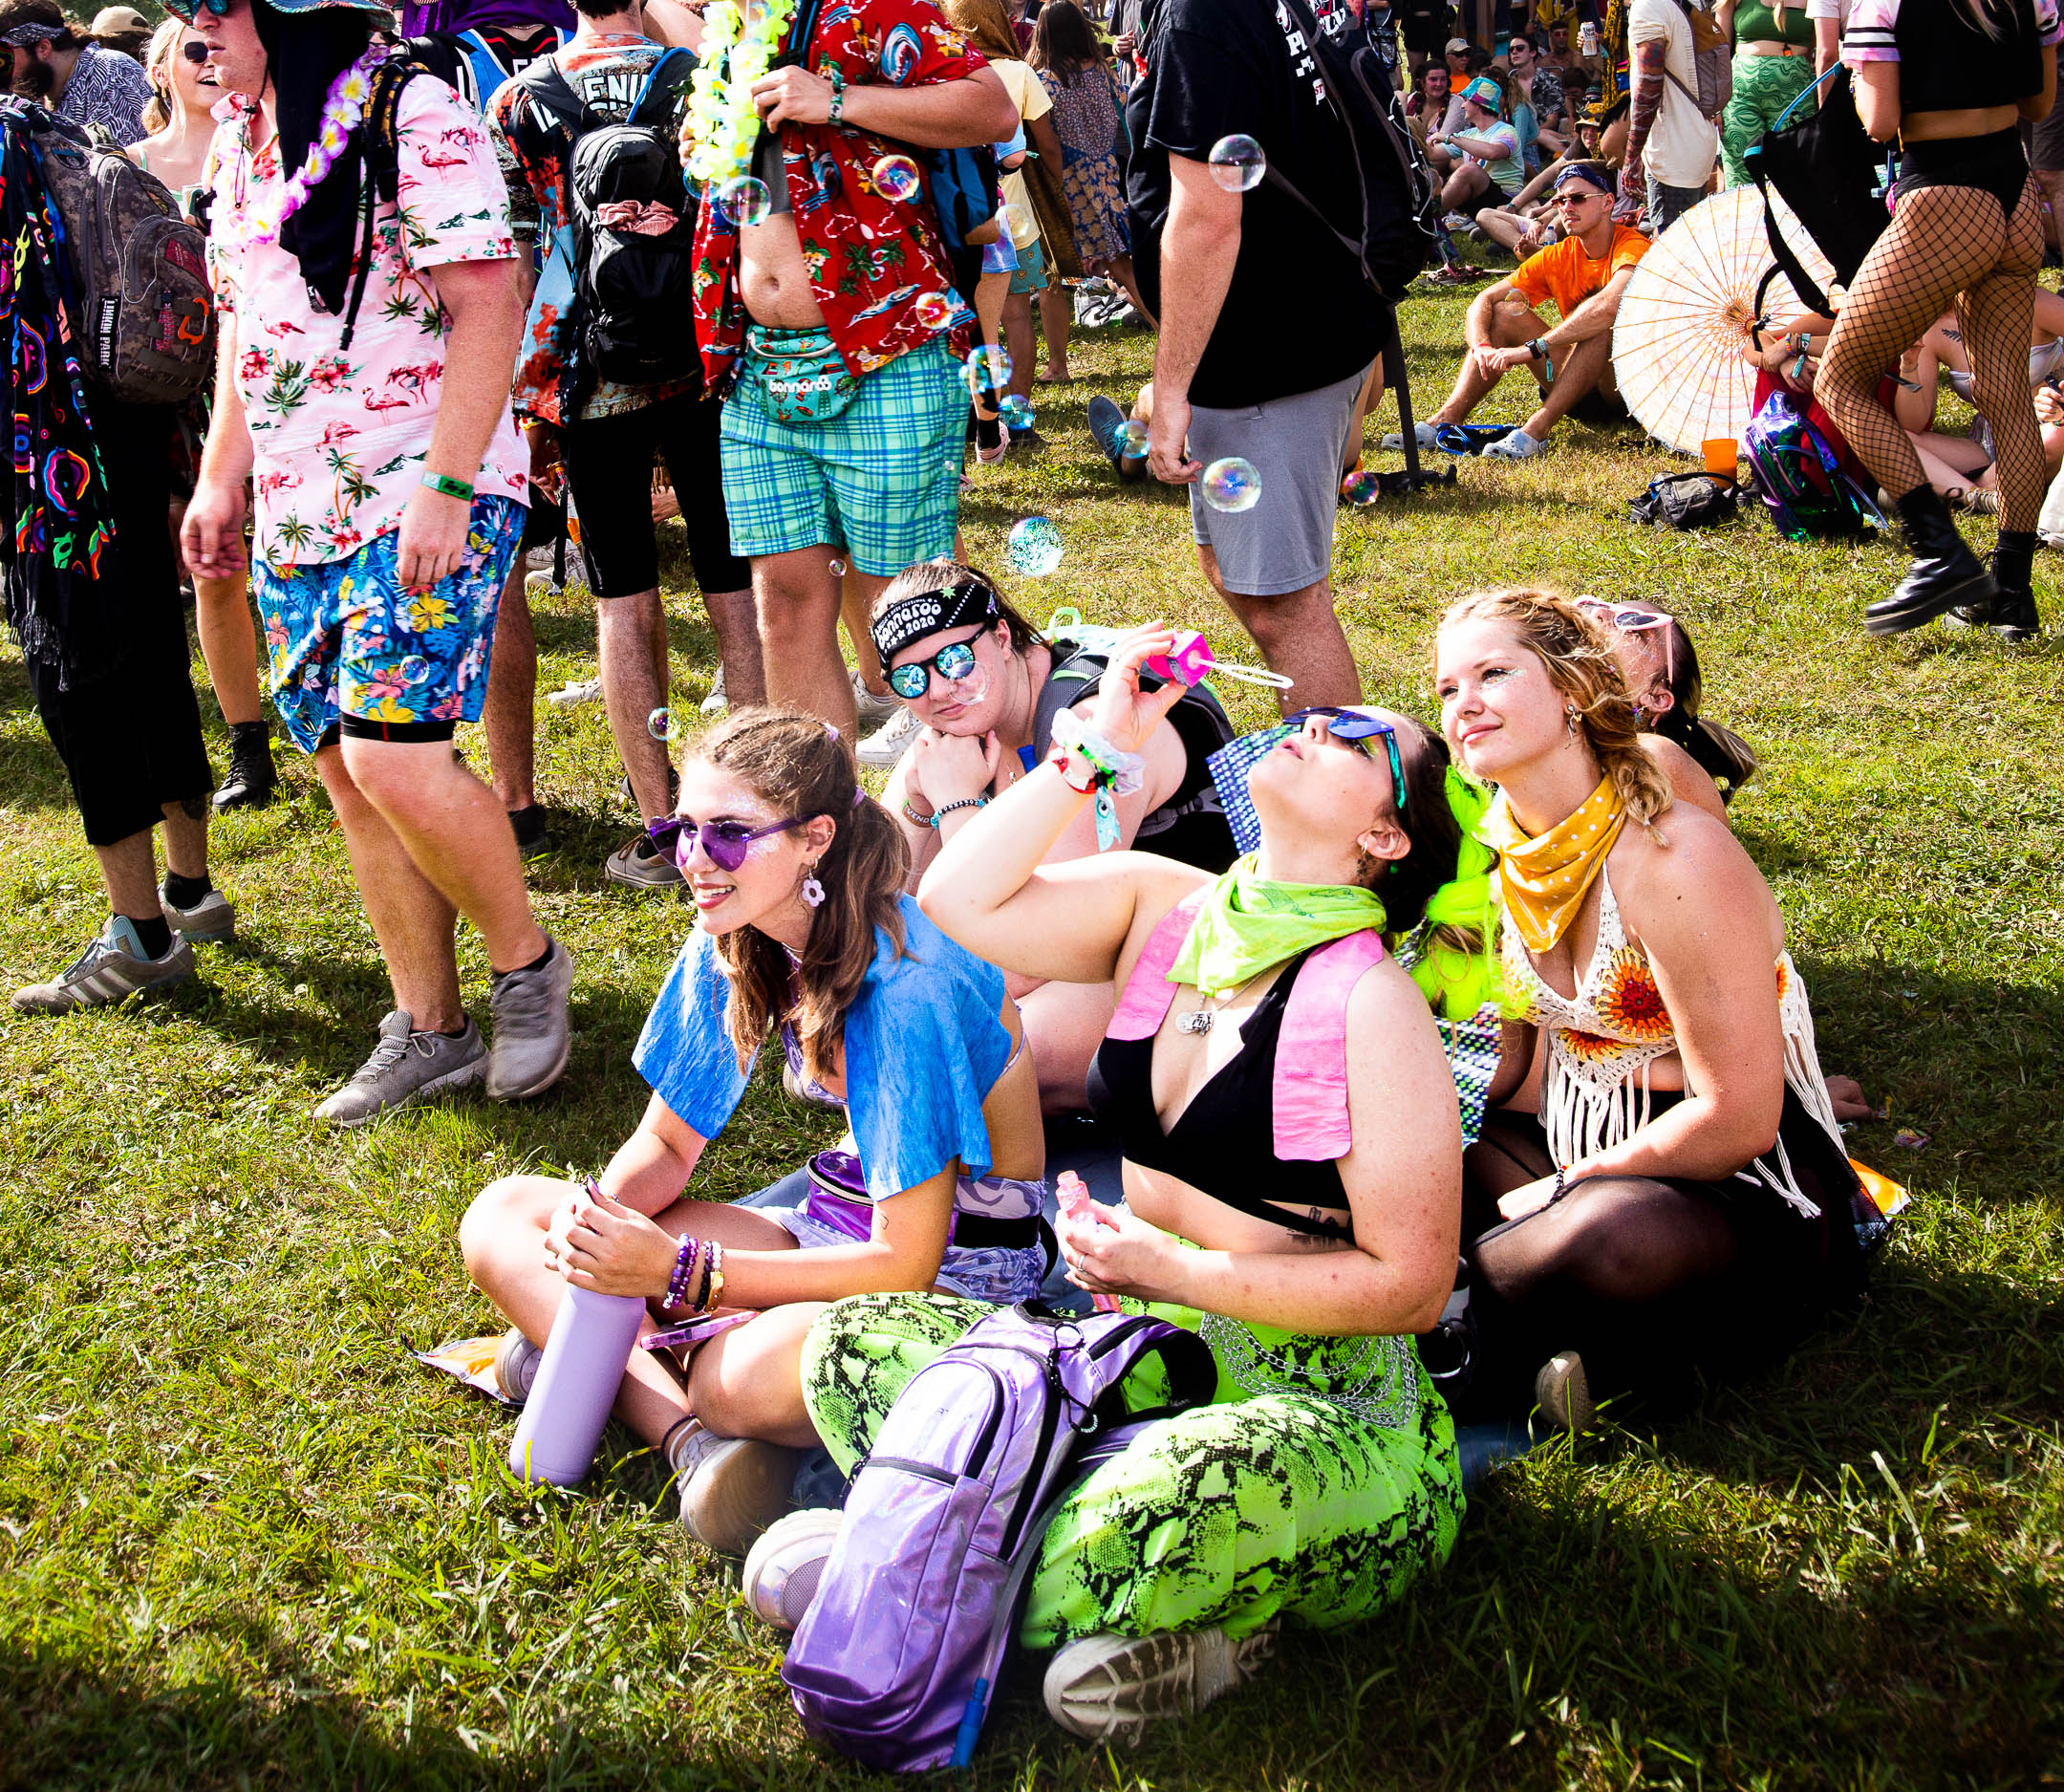 People waiting outdoors at an event, seated and standing, dressed in colorful summer clothes: Hawaiian shirts, crocheted tops, sunglasses, parasols. A person seated on the grass tilts their head back and blows soap bubbles with a pink wand.